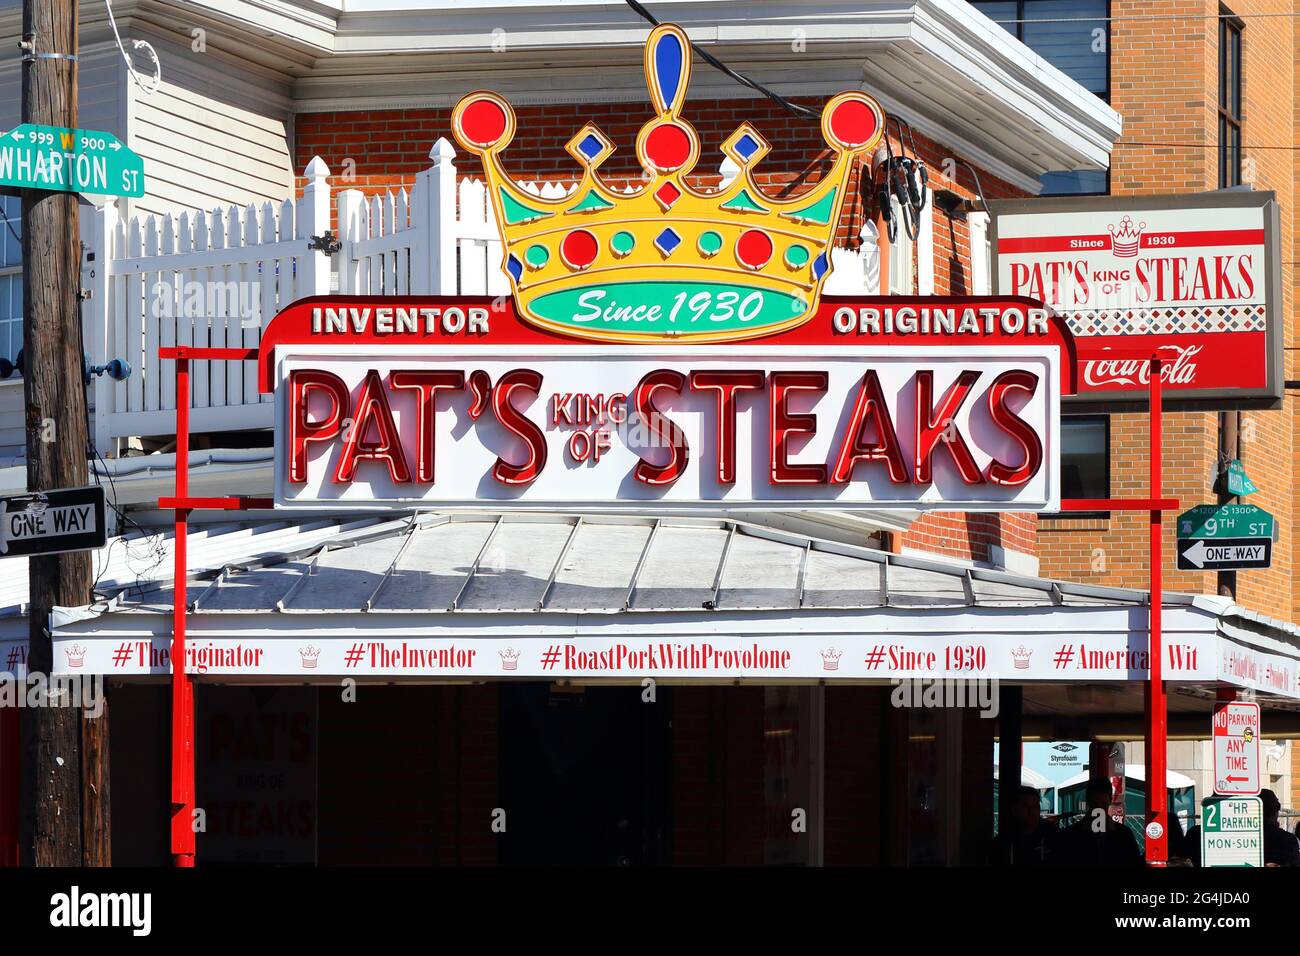 Pat's King of Steaks, 1237 E Passyunk Ave, Philadelphia, PA. signage for a cheesesteak eatery in South Philly. Stock Photo